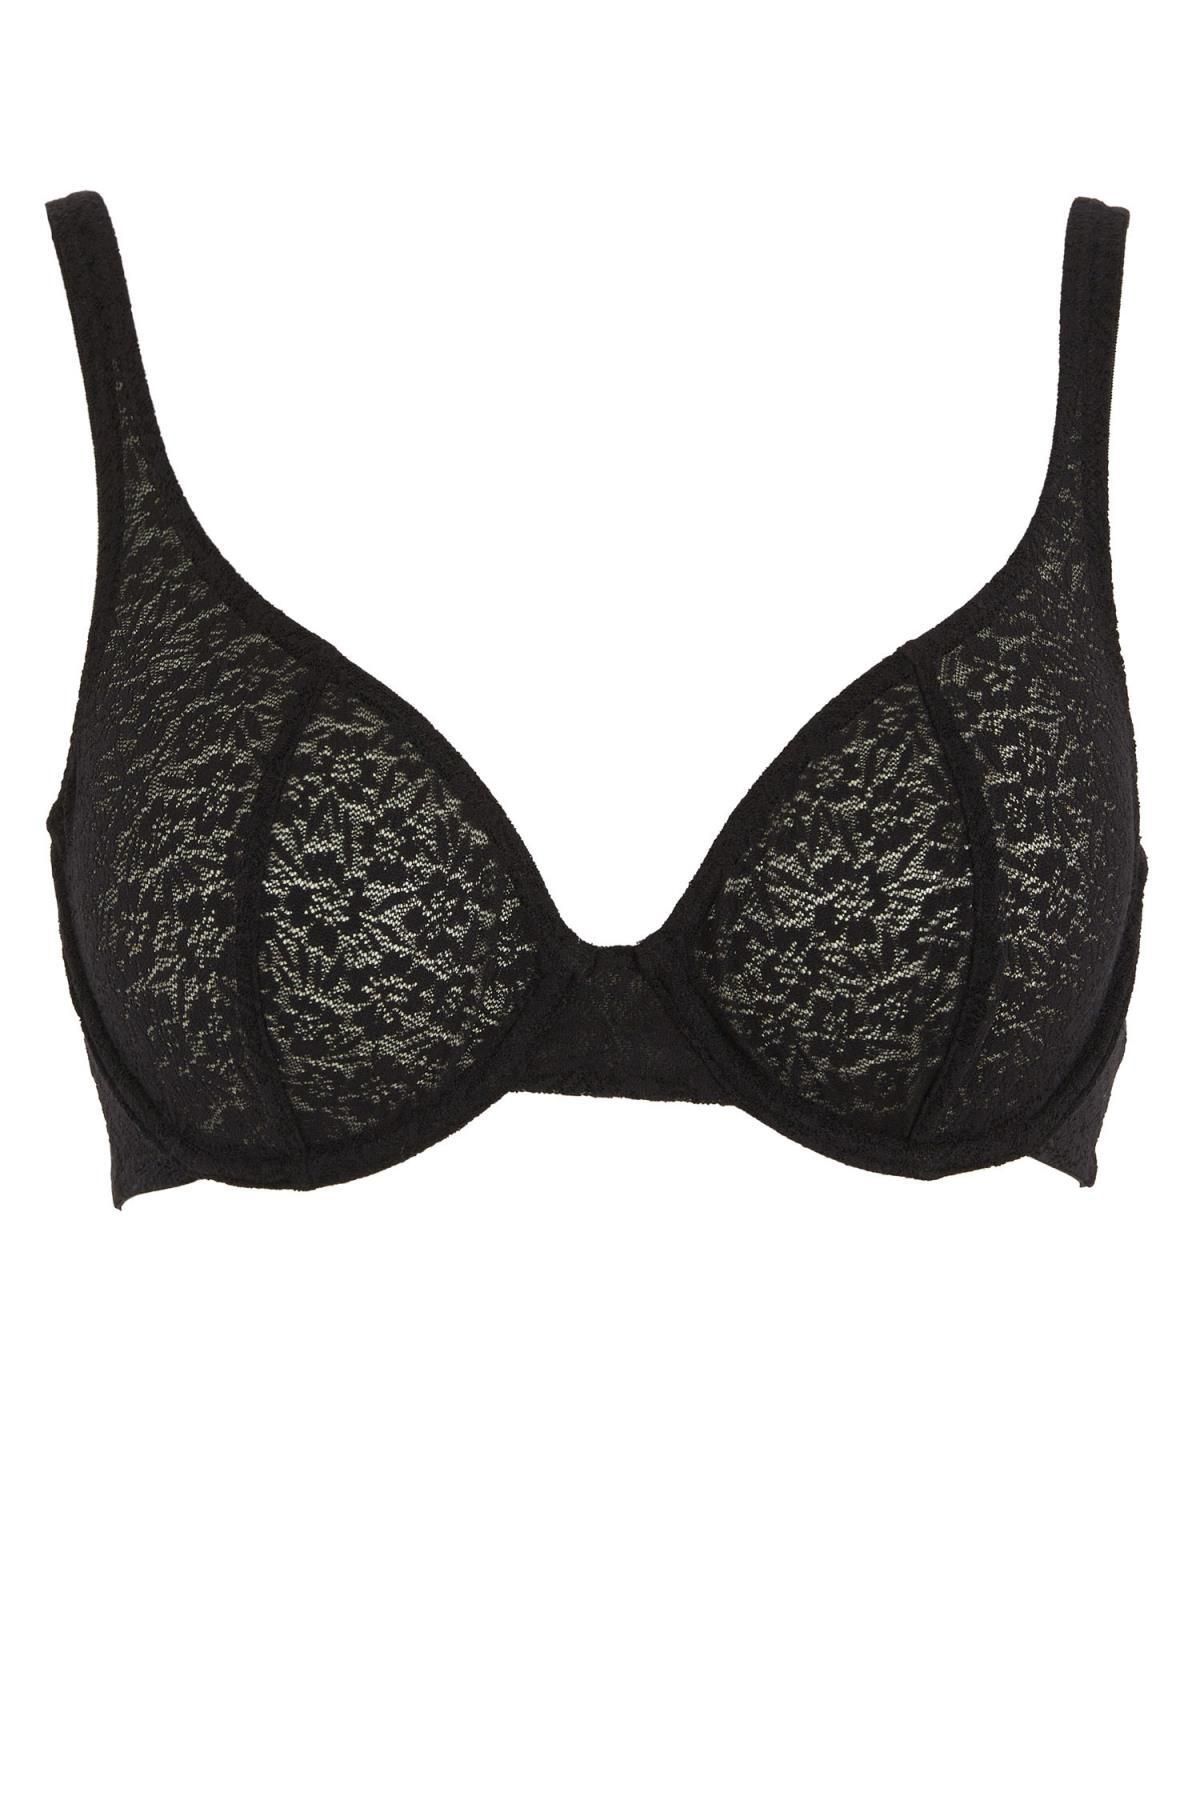 Defacto Fall in Love Lace Coverless Padless Bra